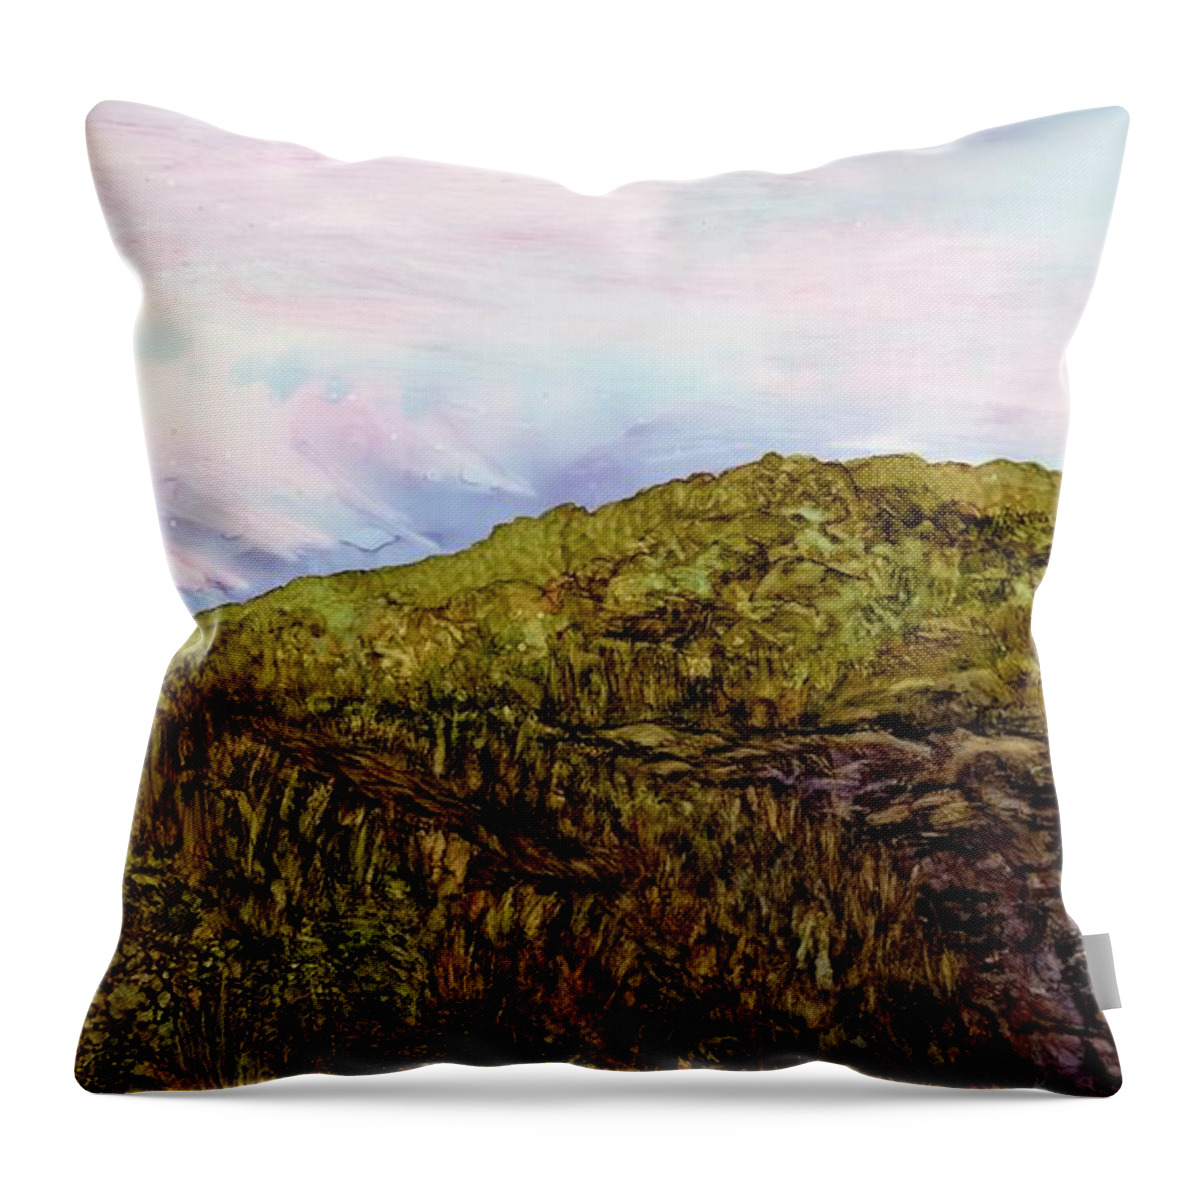 Gorge Throw Pillow featuring the painting Summer in Wild Rivers by Angela Marinari